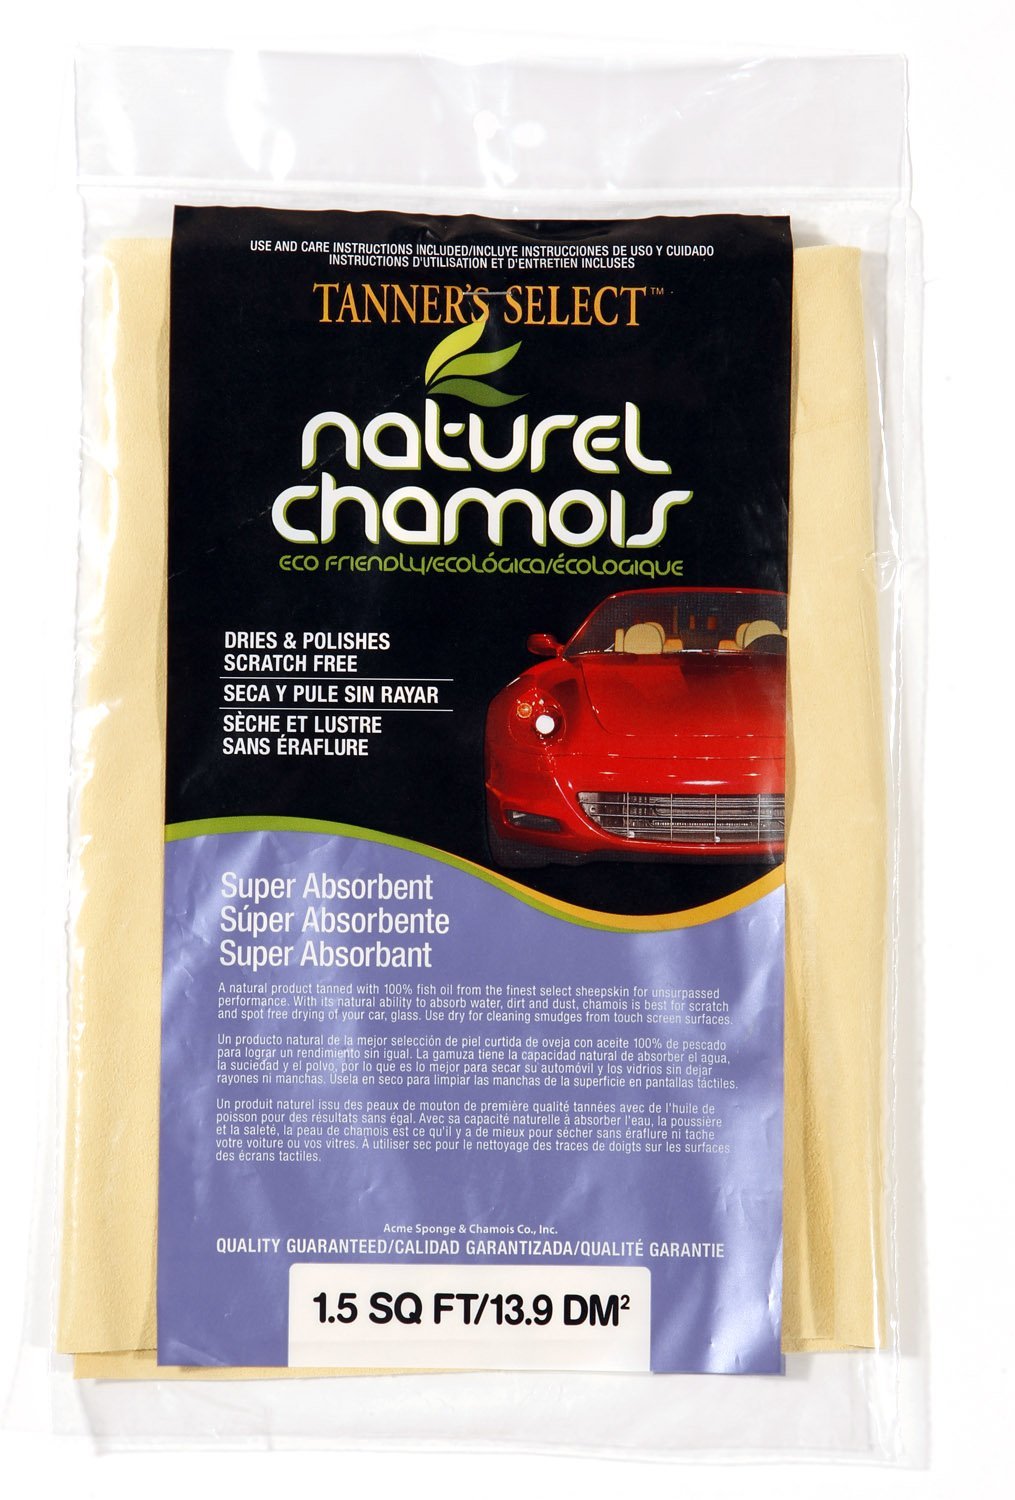 Buy tanner's select leather life - Online store for car care, towels & chamois in USA, on sale, low price, discount deals, coupon code